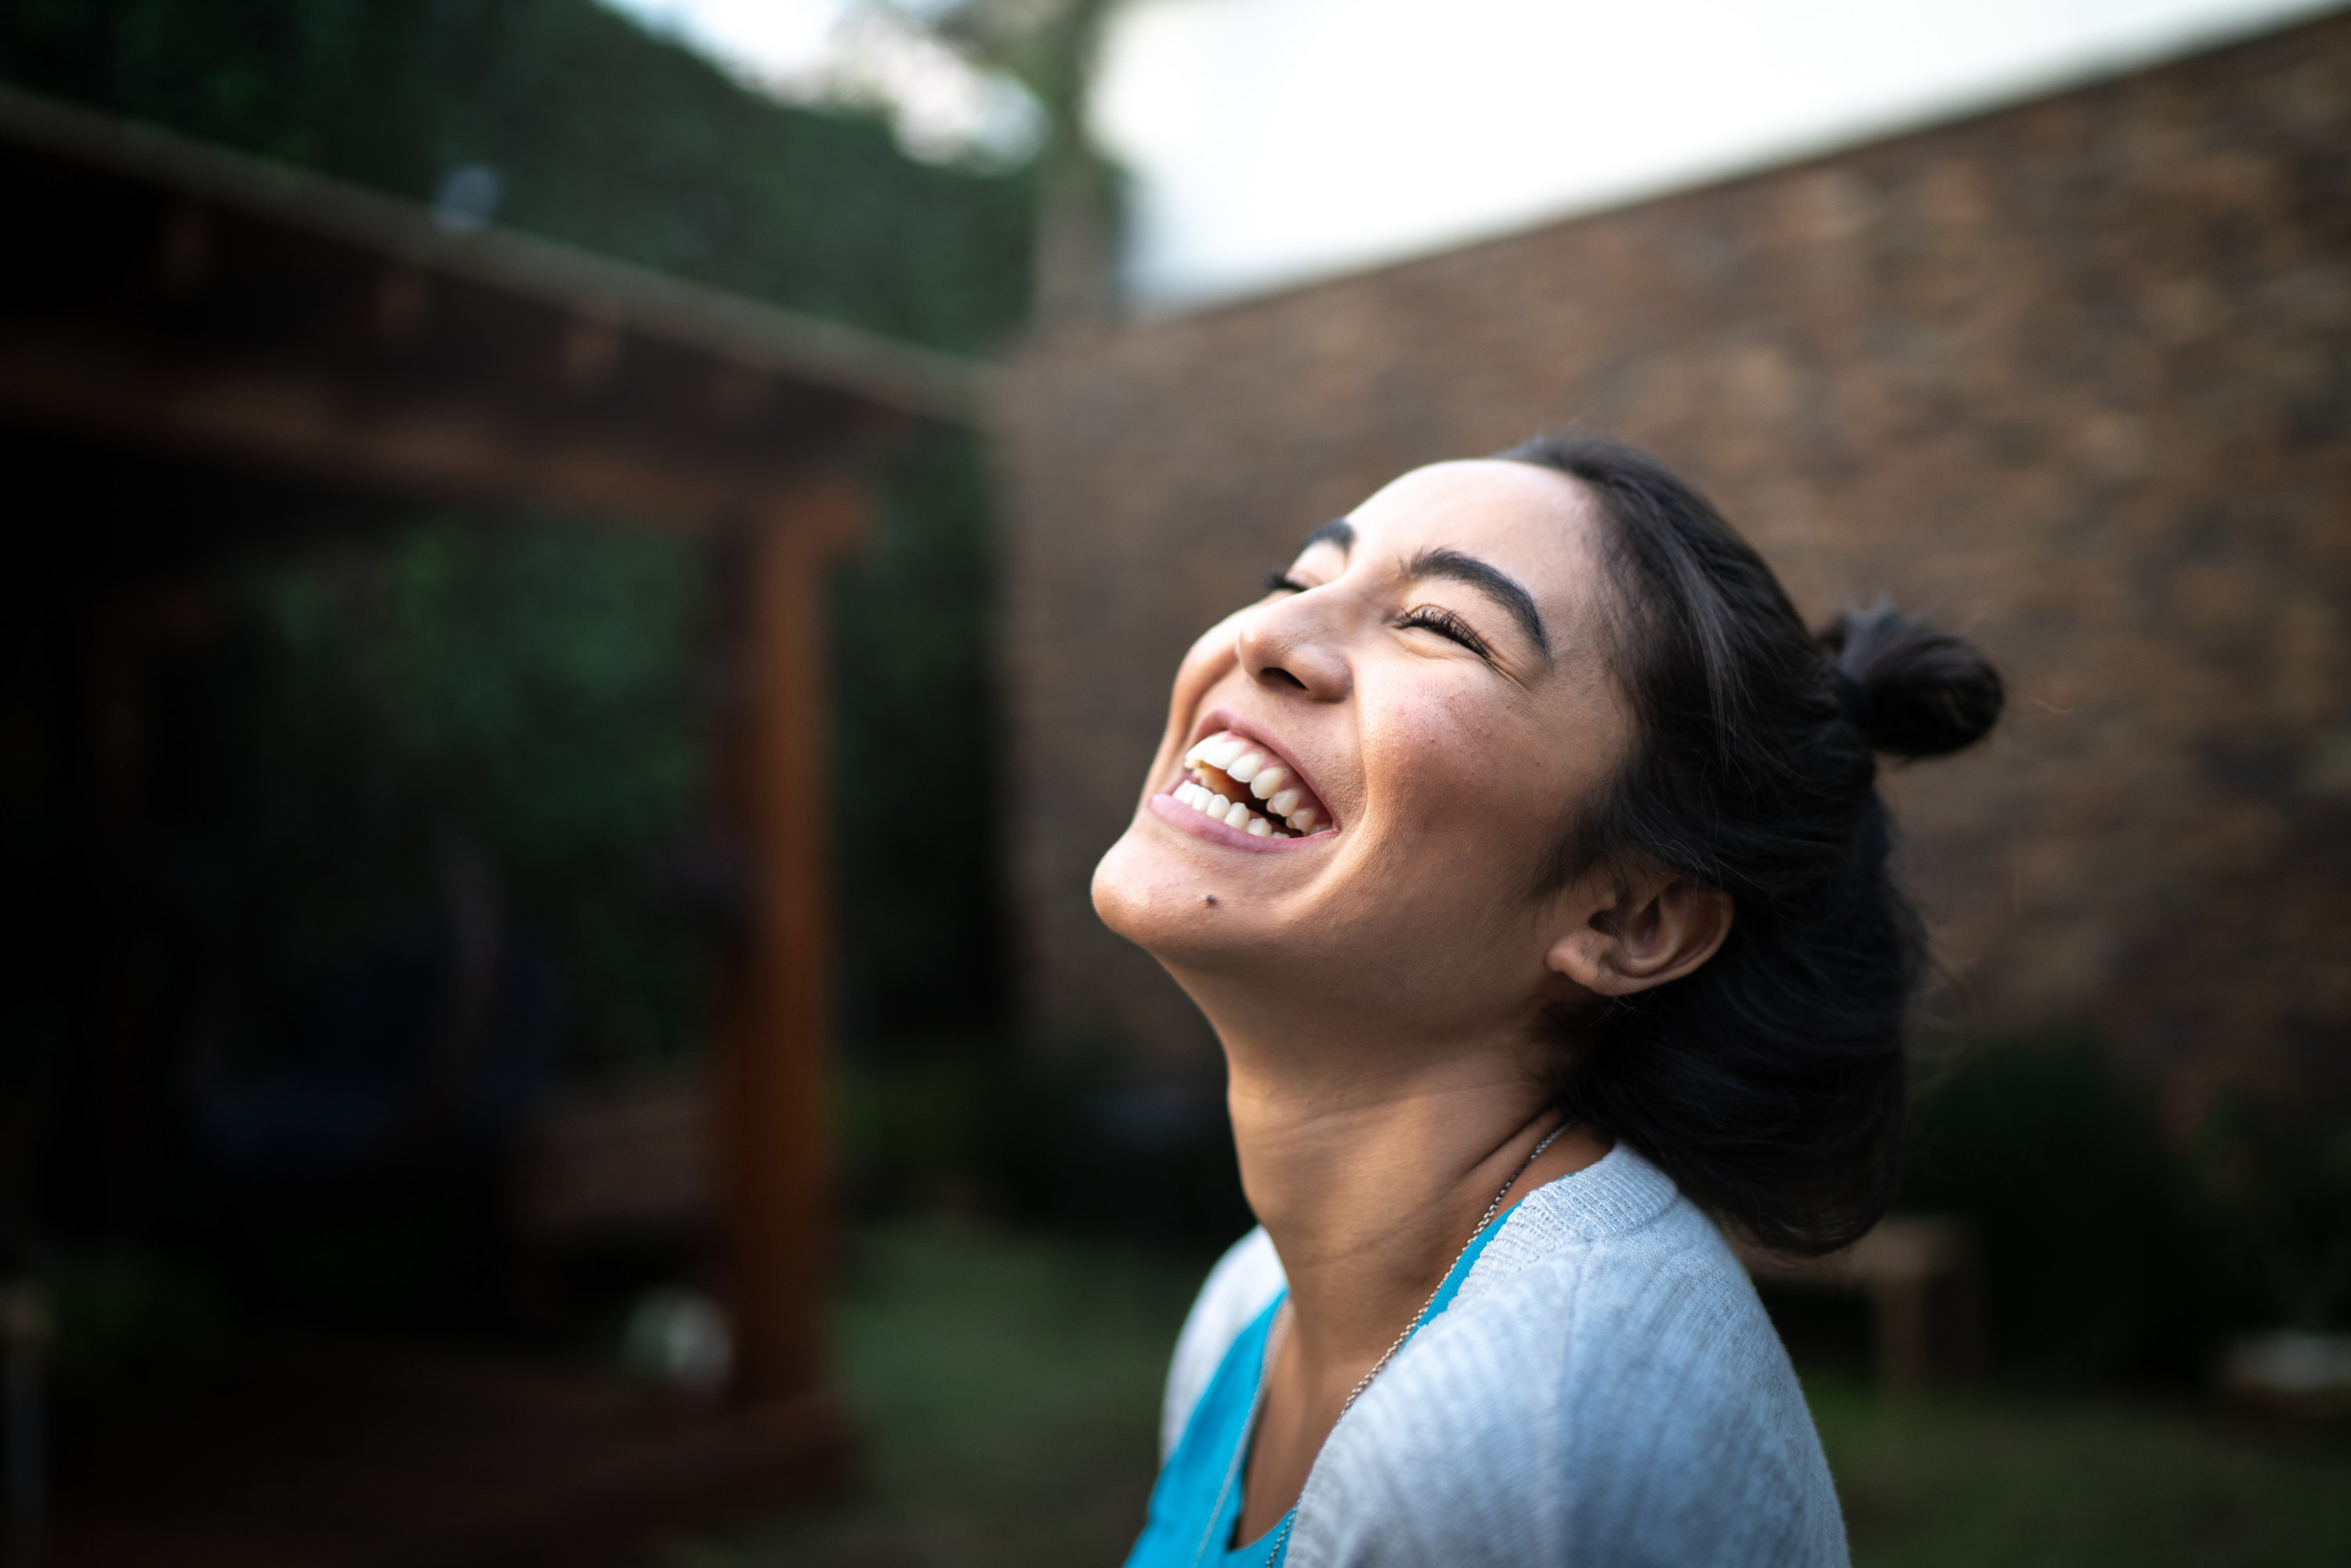 A woman laughing outdoors